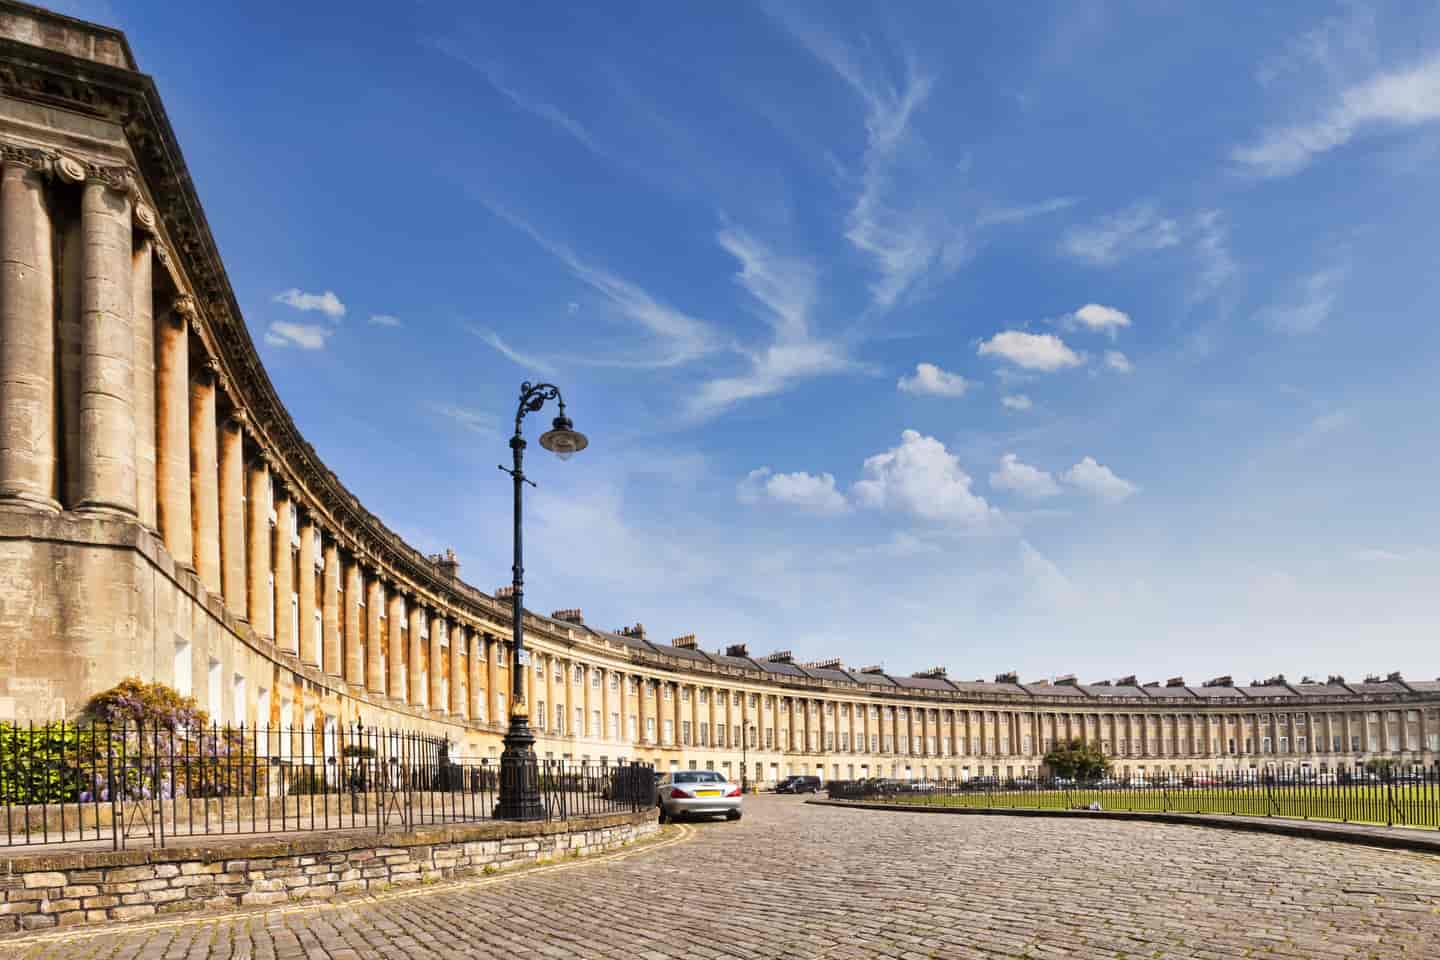 Student Accommodation in Bath - The Royal Crescent on a sunny day